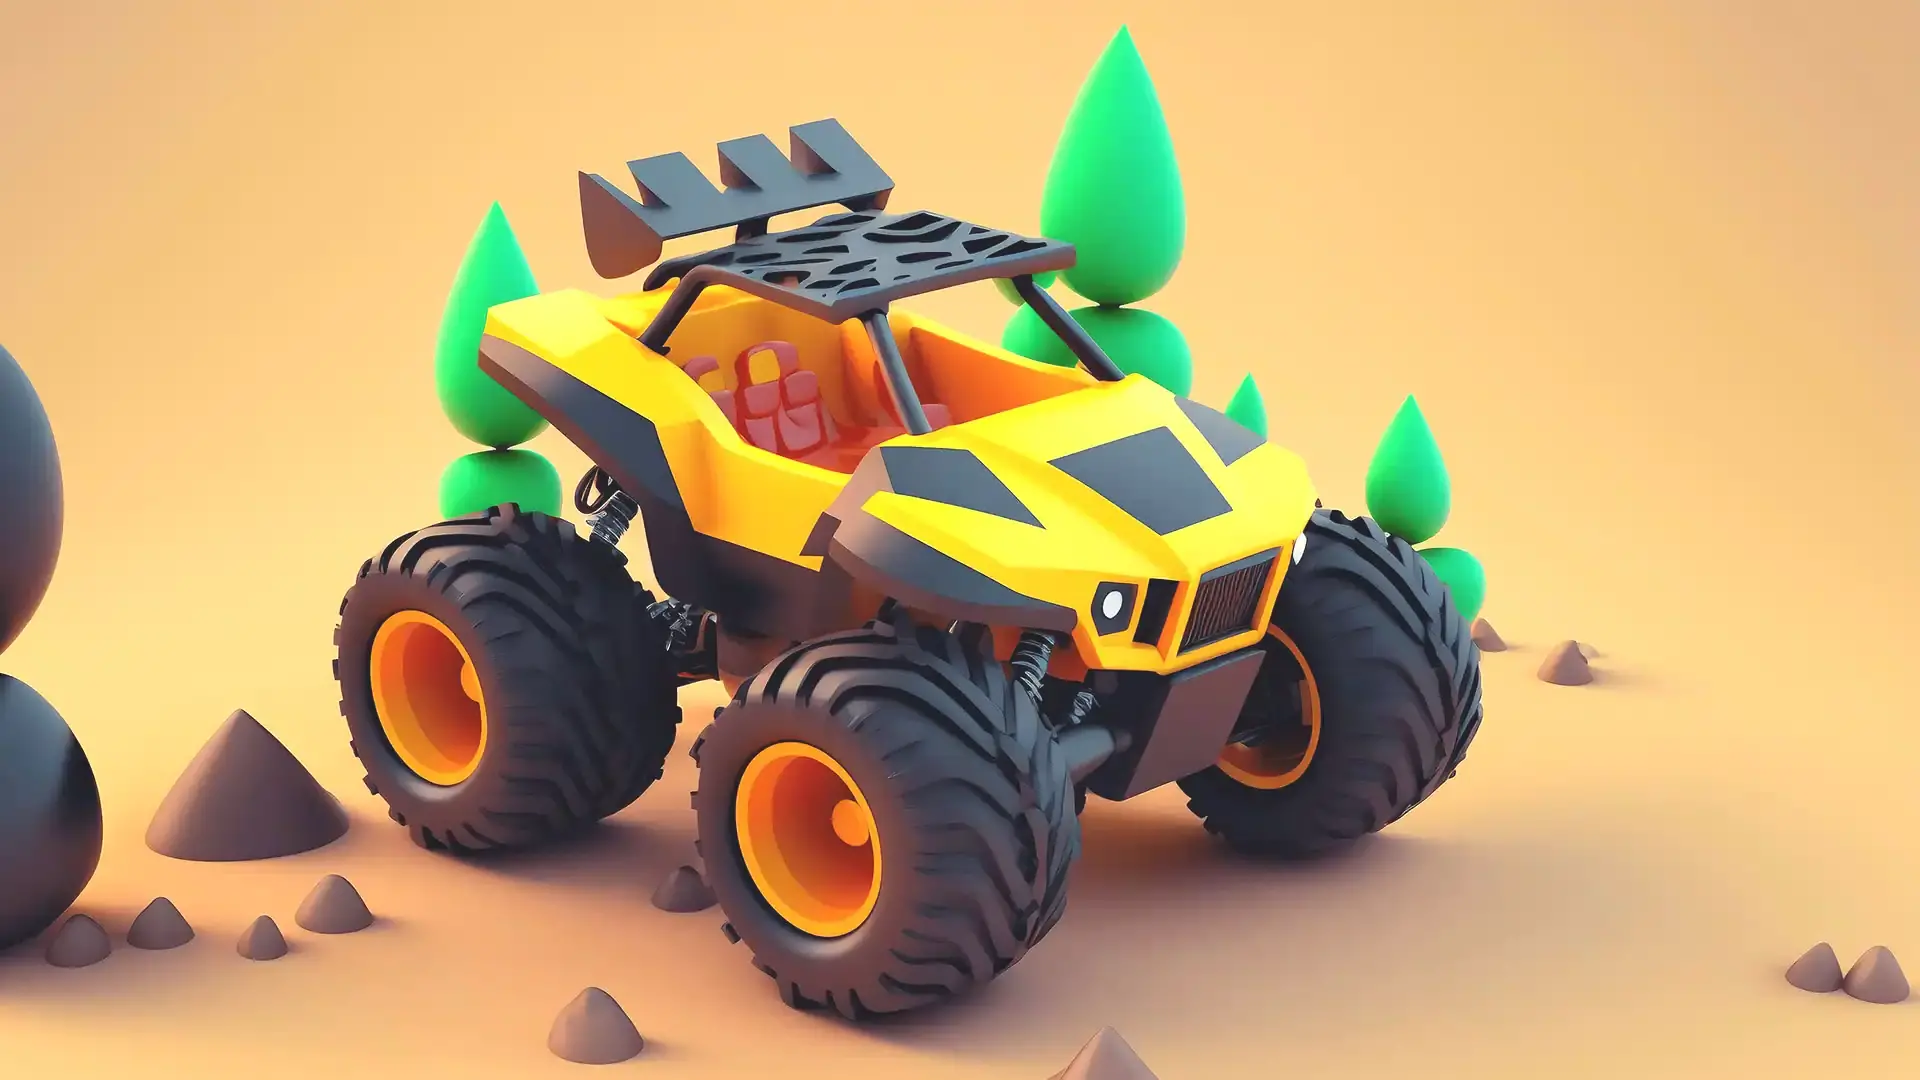 3d image of cartoon style off-road vehicle.